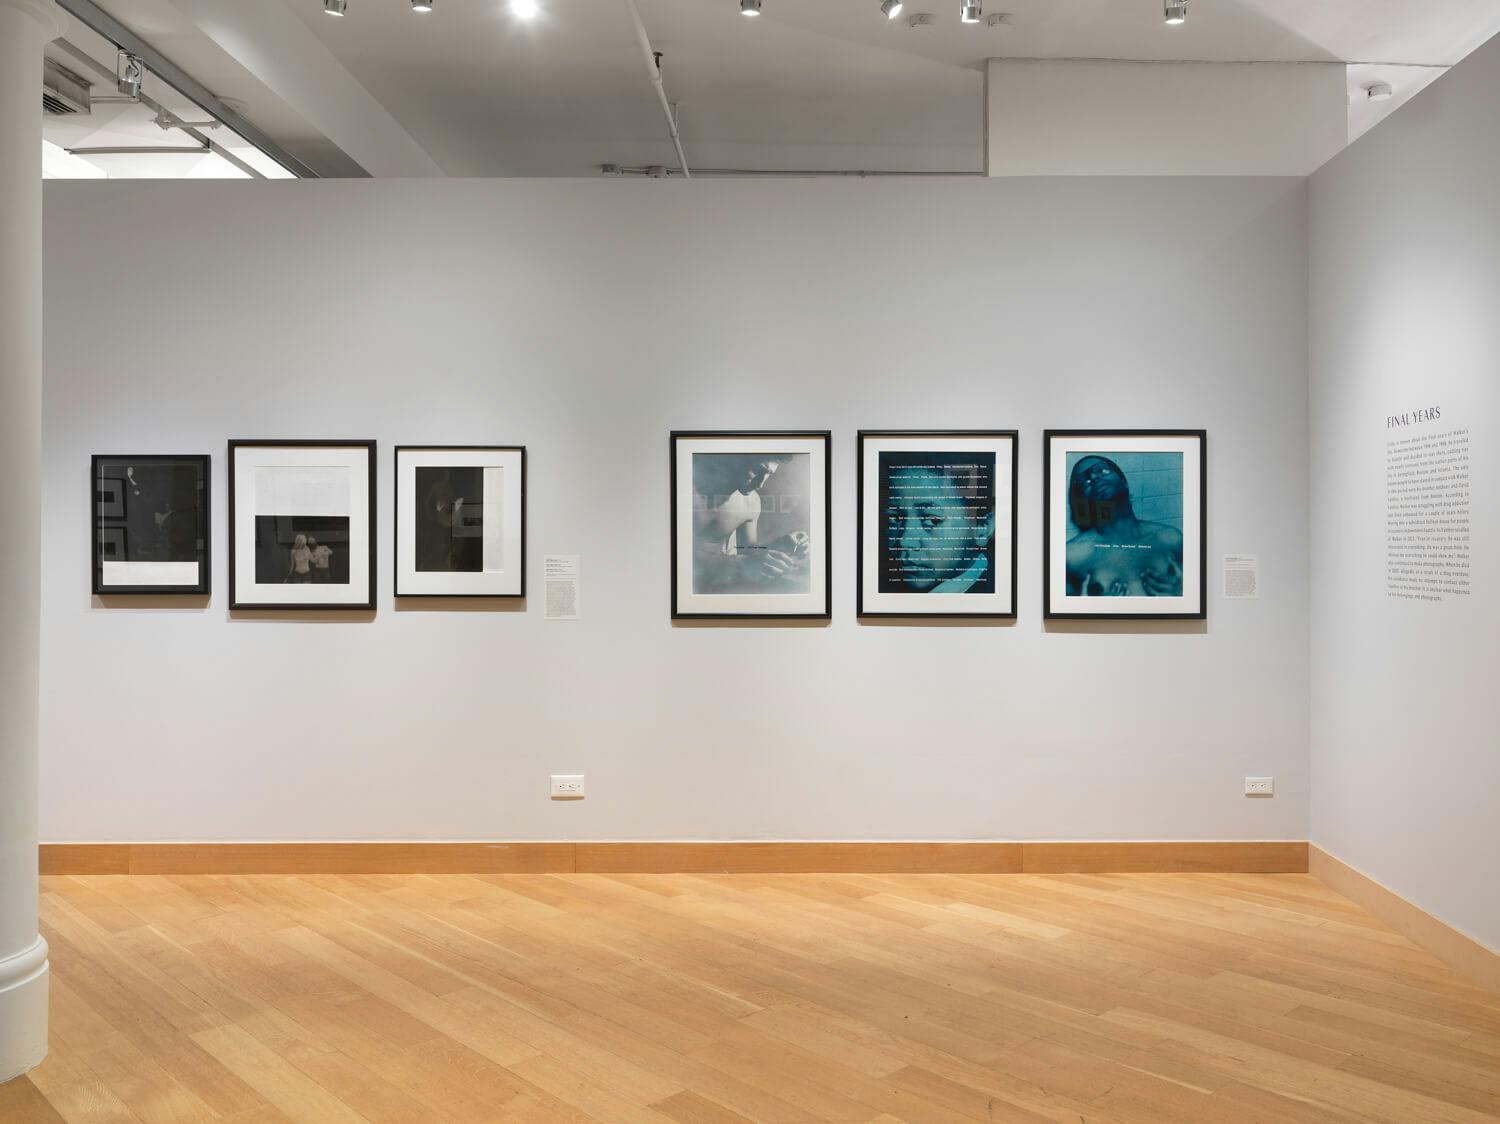 Christian Walker's photographs, some black and white, some blue toned, line the walls of a gallery.